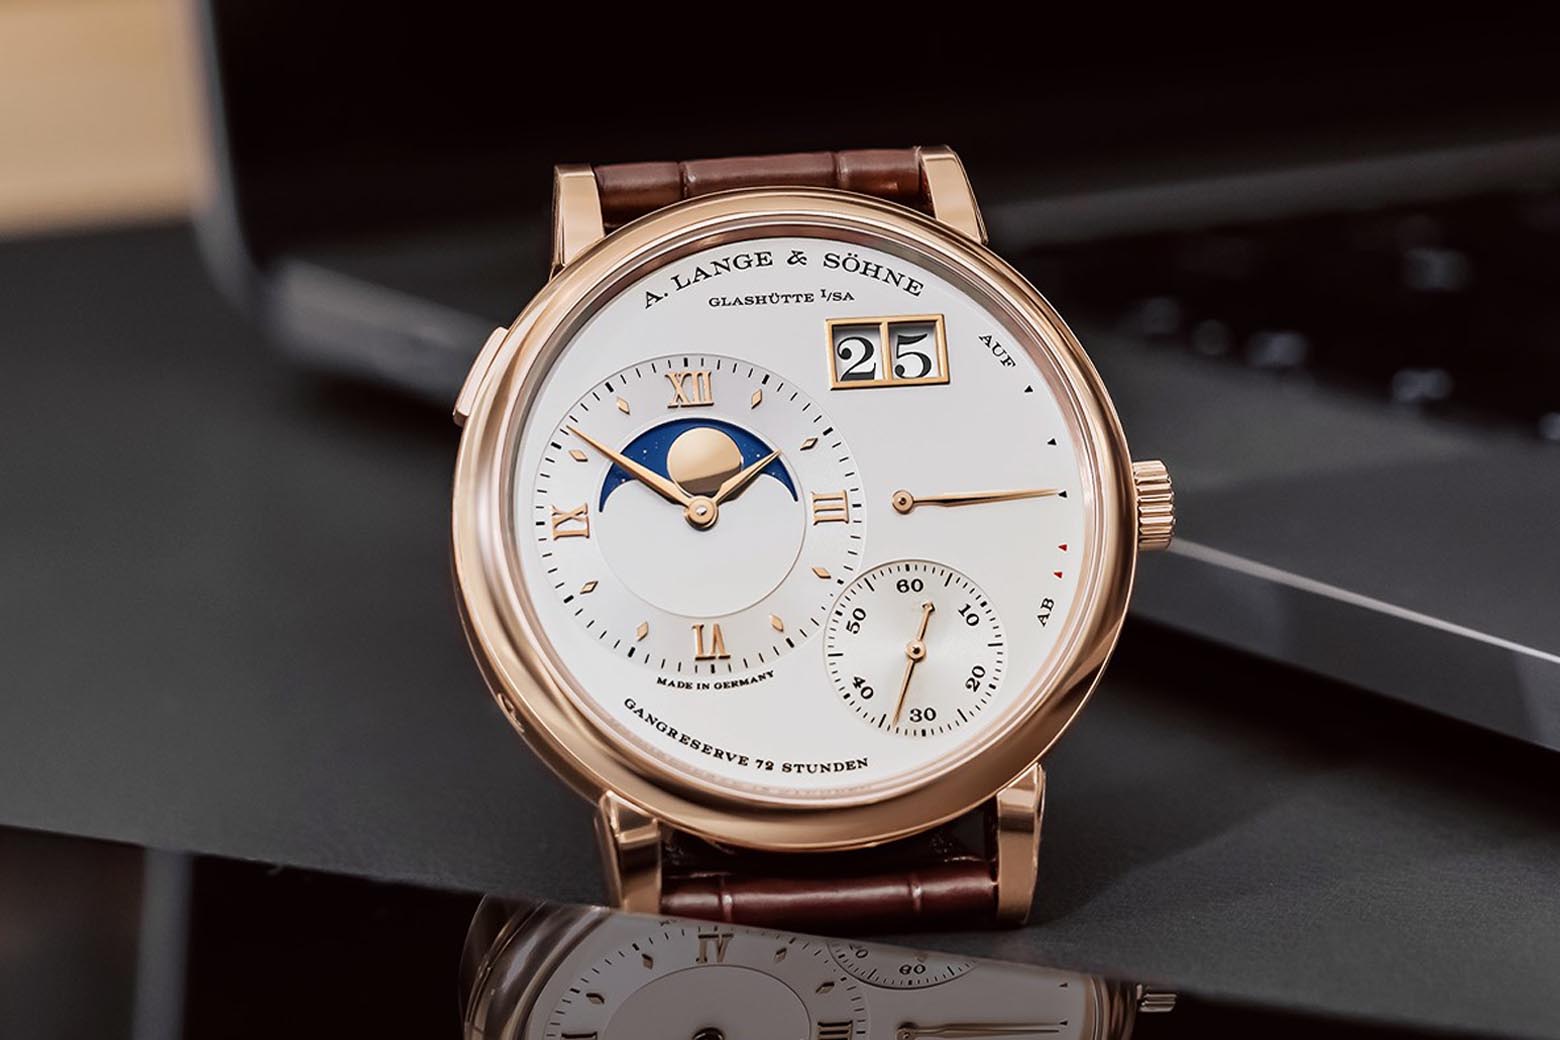 A Lange & Söhne: All Models & Prices (Buying Guide)